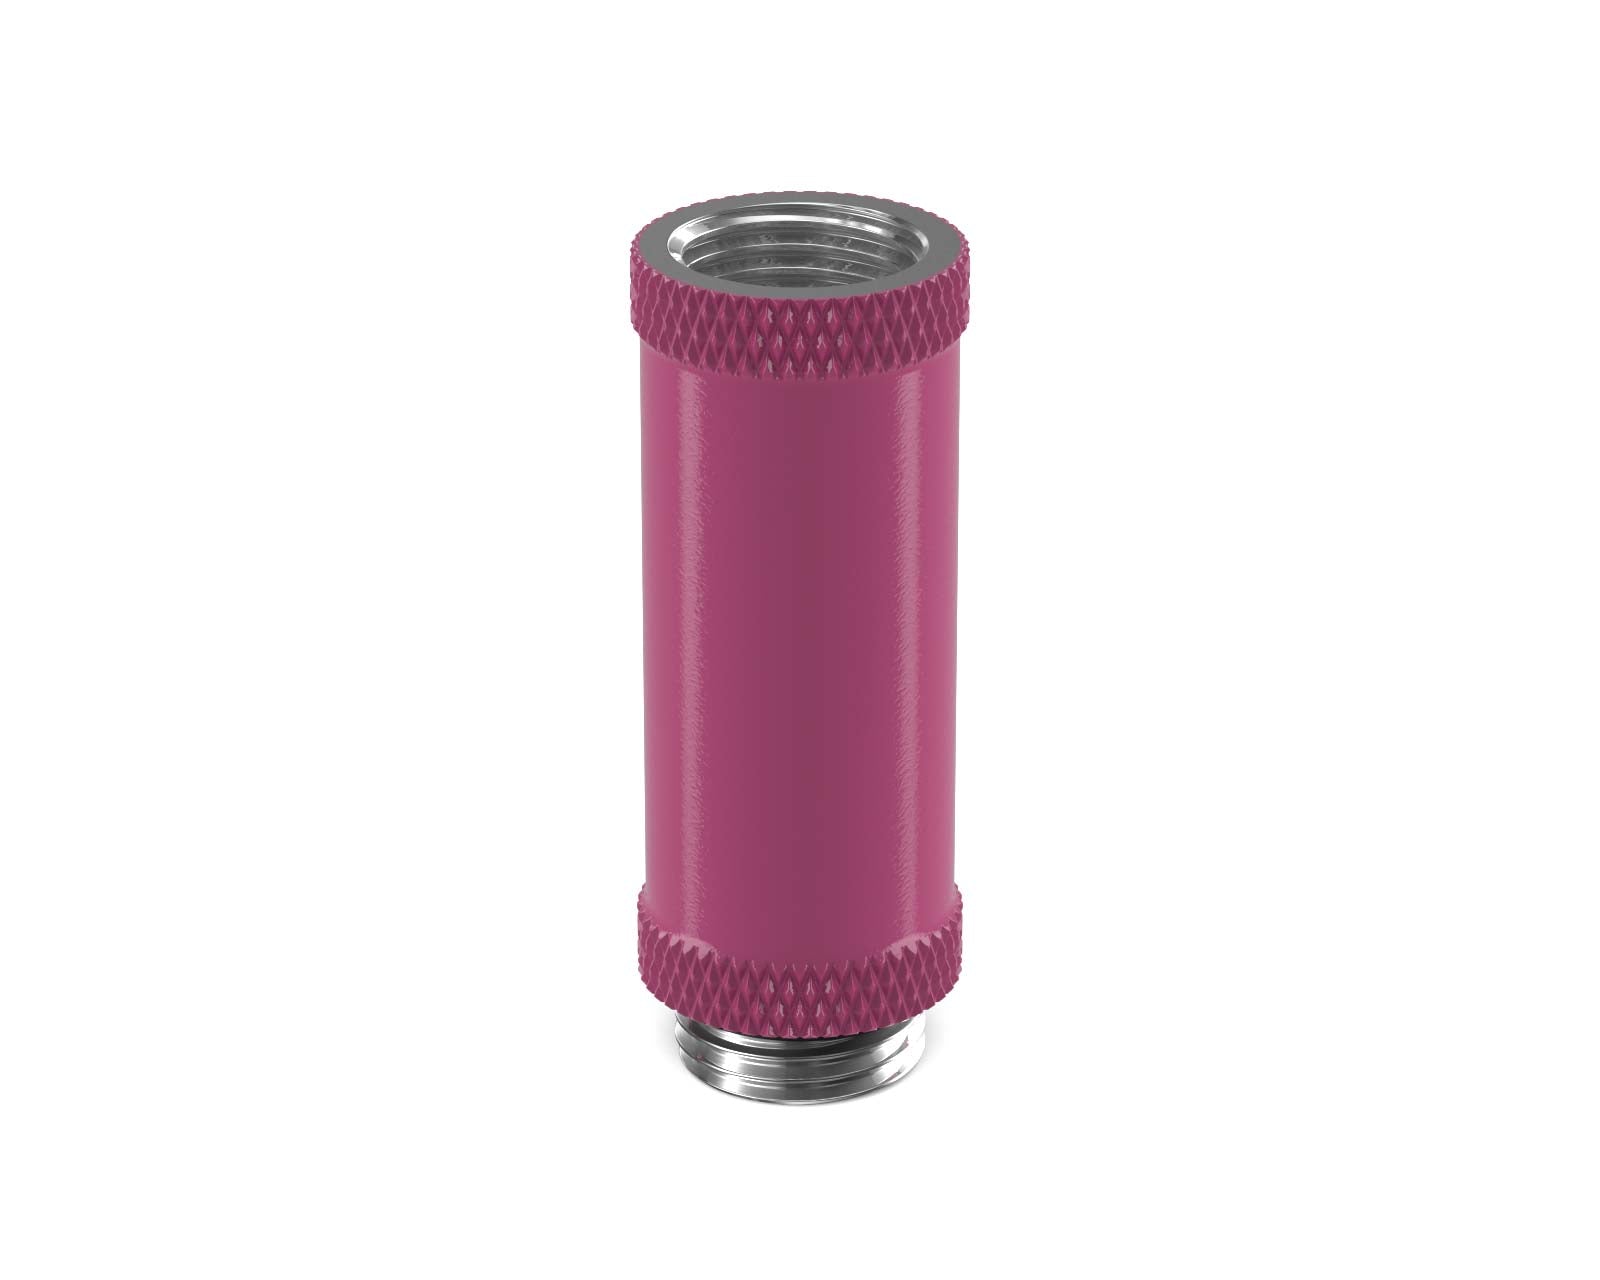 PrimoChill Male to Female G 1/4in. 40mm SX Extension Coupler - PrimoChill - KEEPING IT COOL Magenta